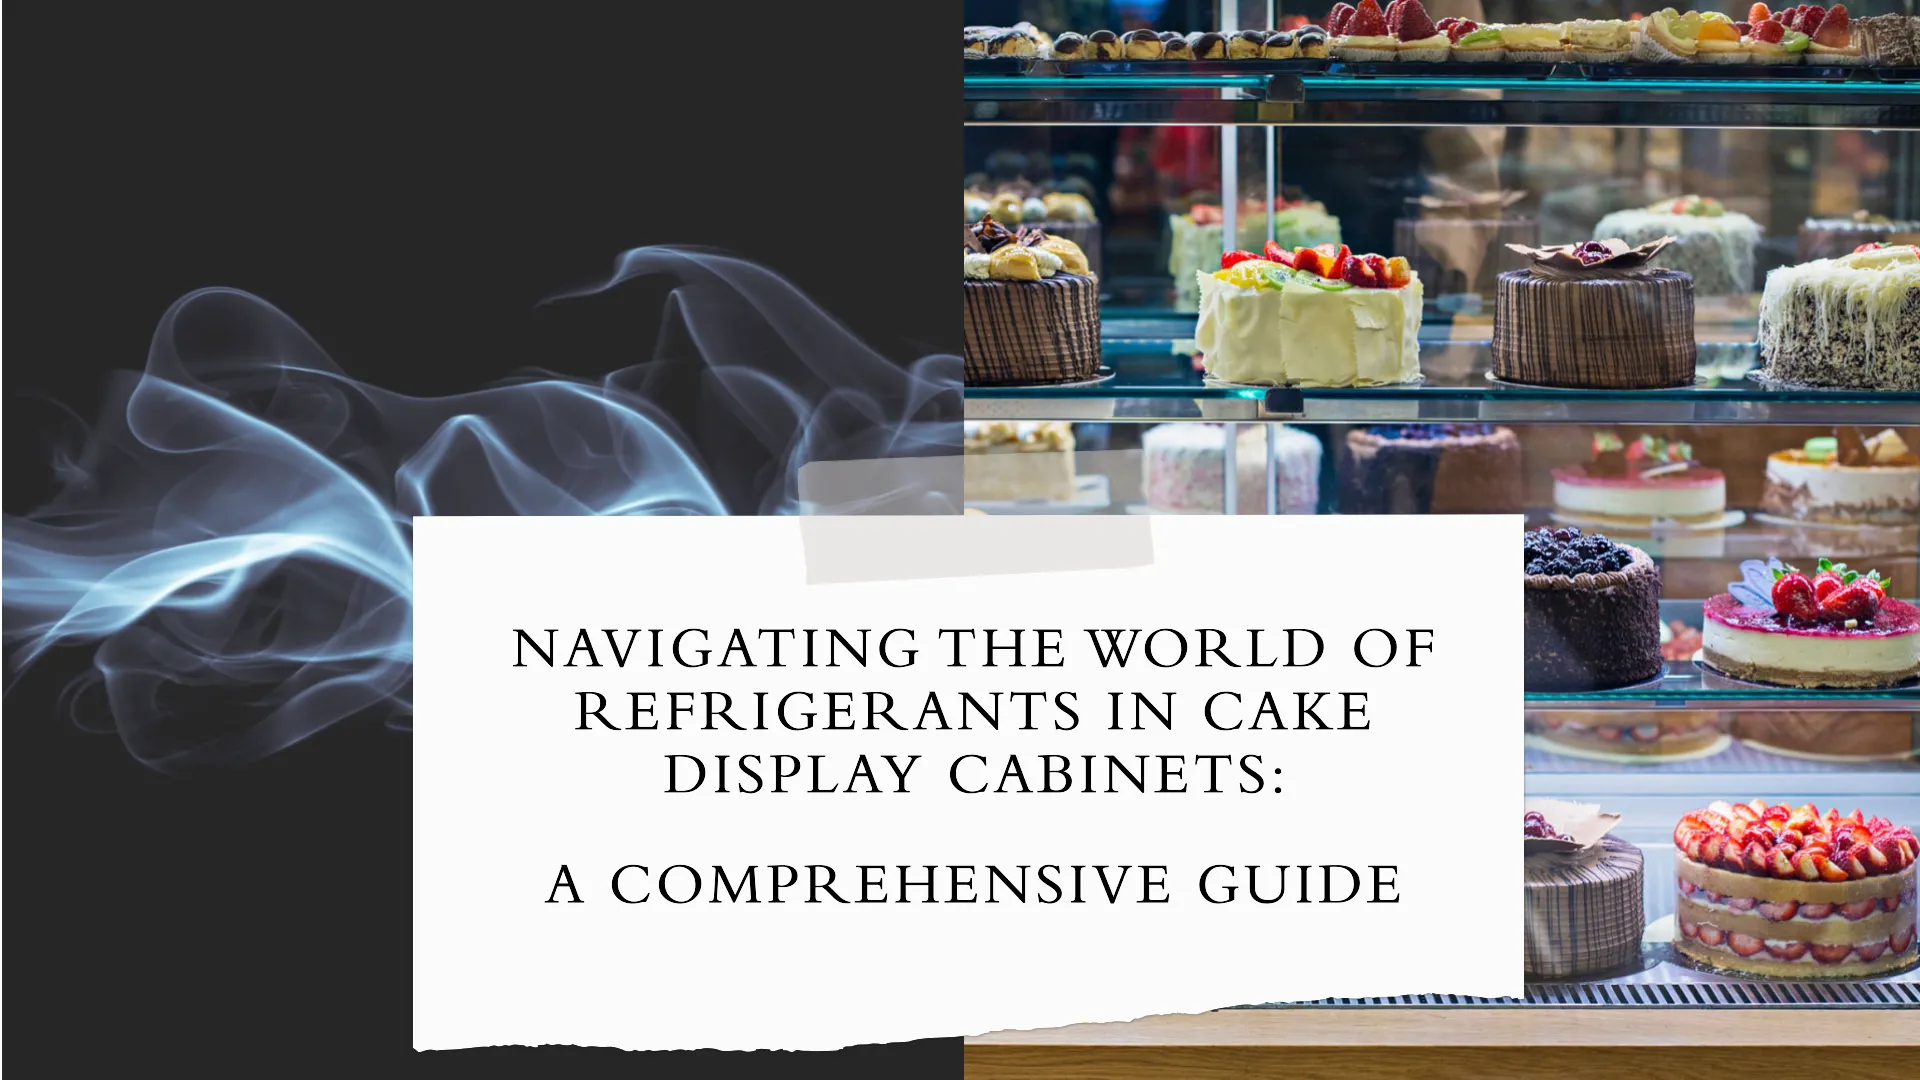 Navigating the World of Refrigerants in Cake Display Cabinets: A Comprehensive Guide